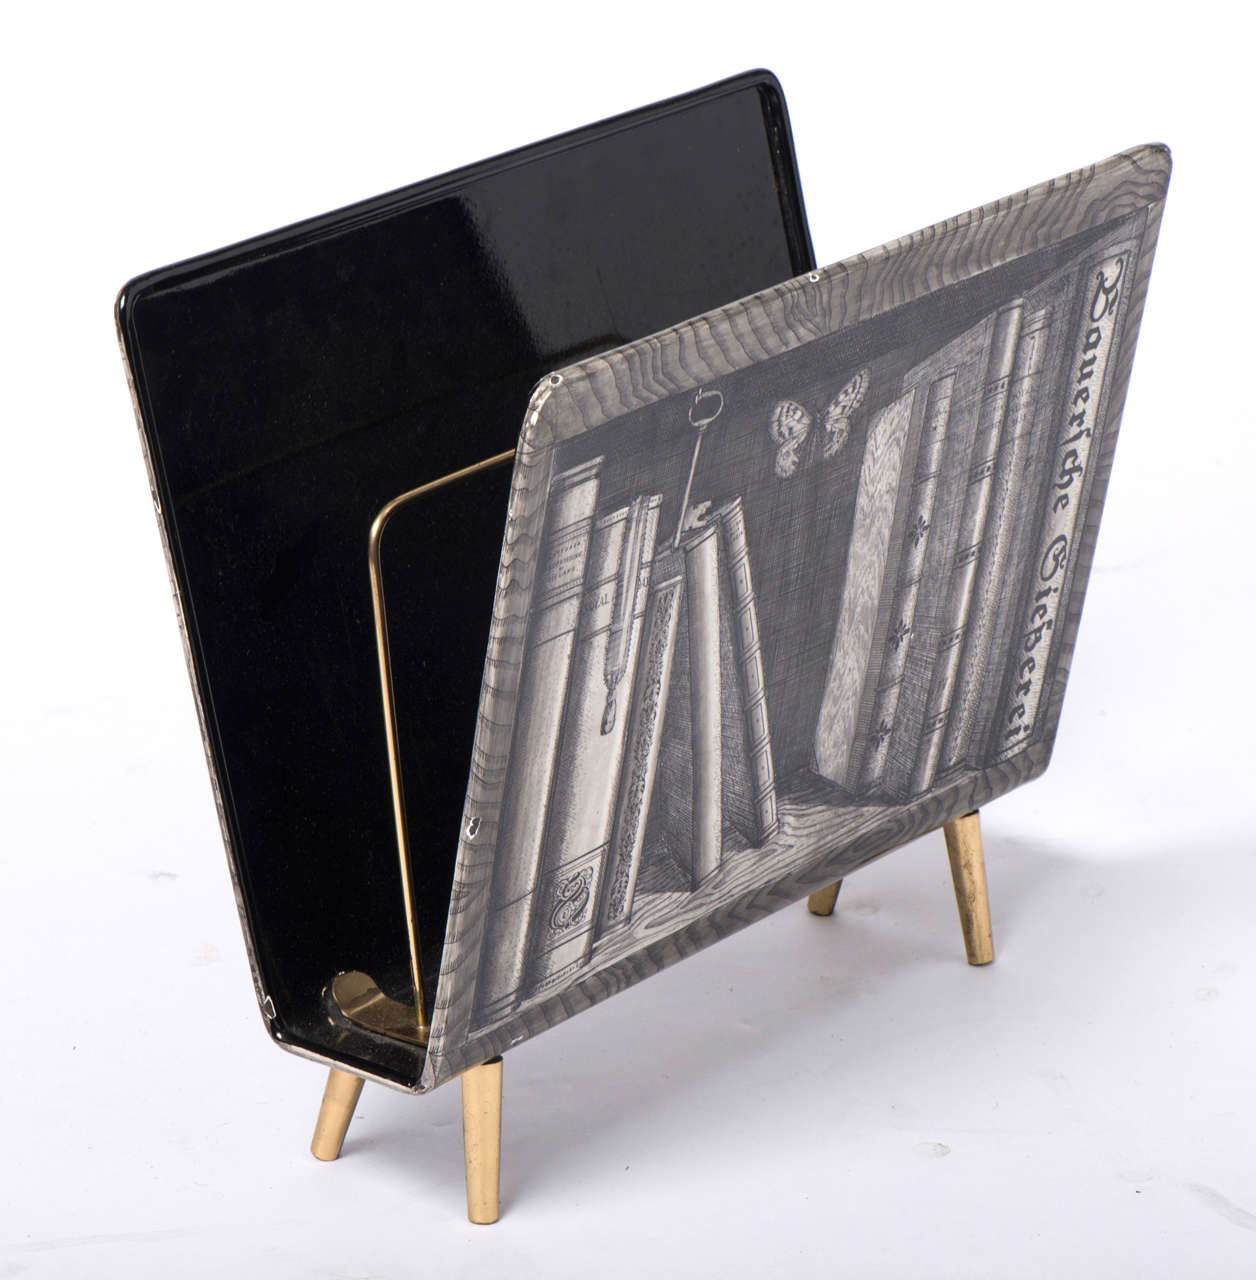 An Atelier Fornasetti “Libri” magazine rack.
Lithographically printed metal on brass feet.
Italy, circa 1988-1989.
Label to base.
Measures: 39cms H x 42.5cms W x 22cms D.